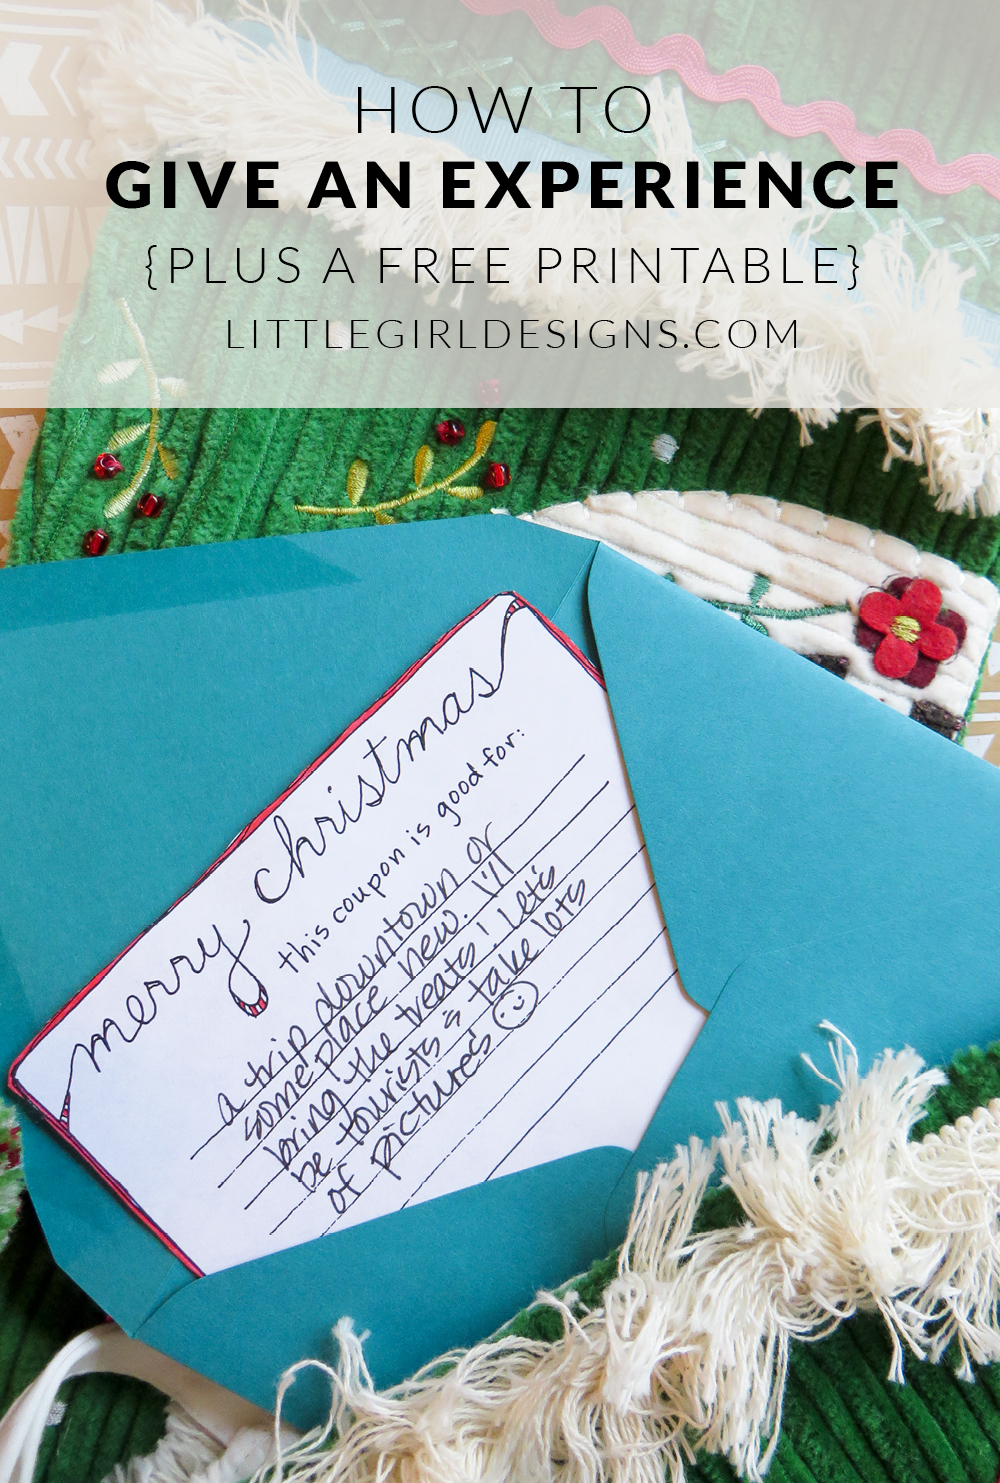 Give An Experience – Plus a Free Printable!